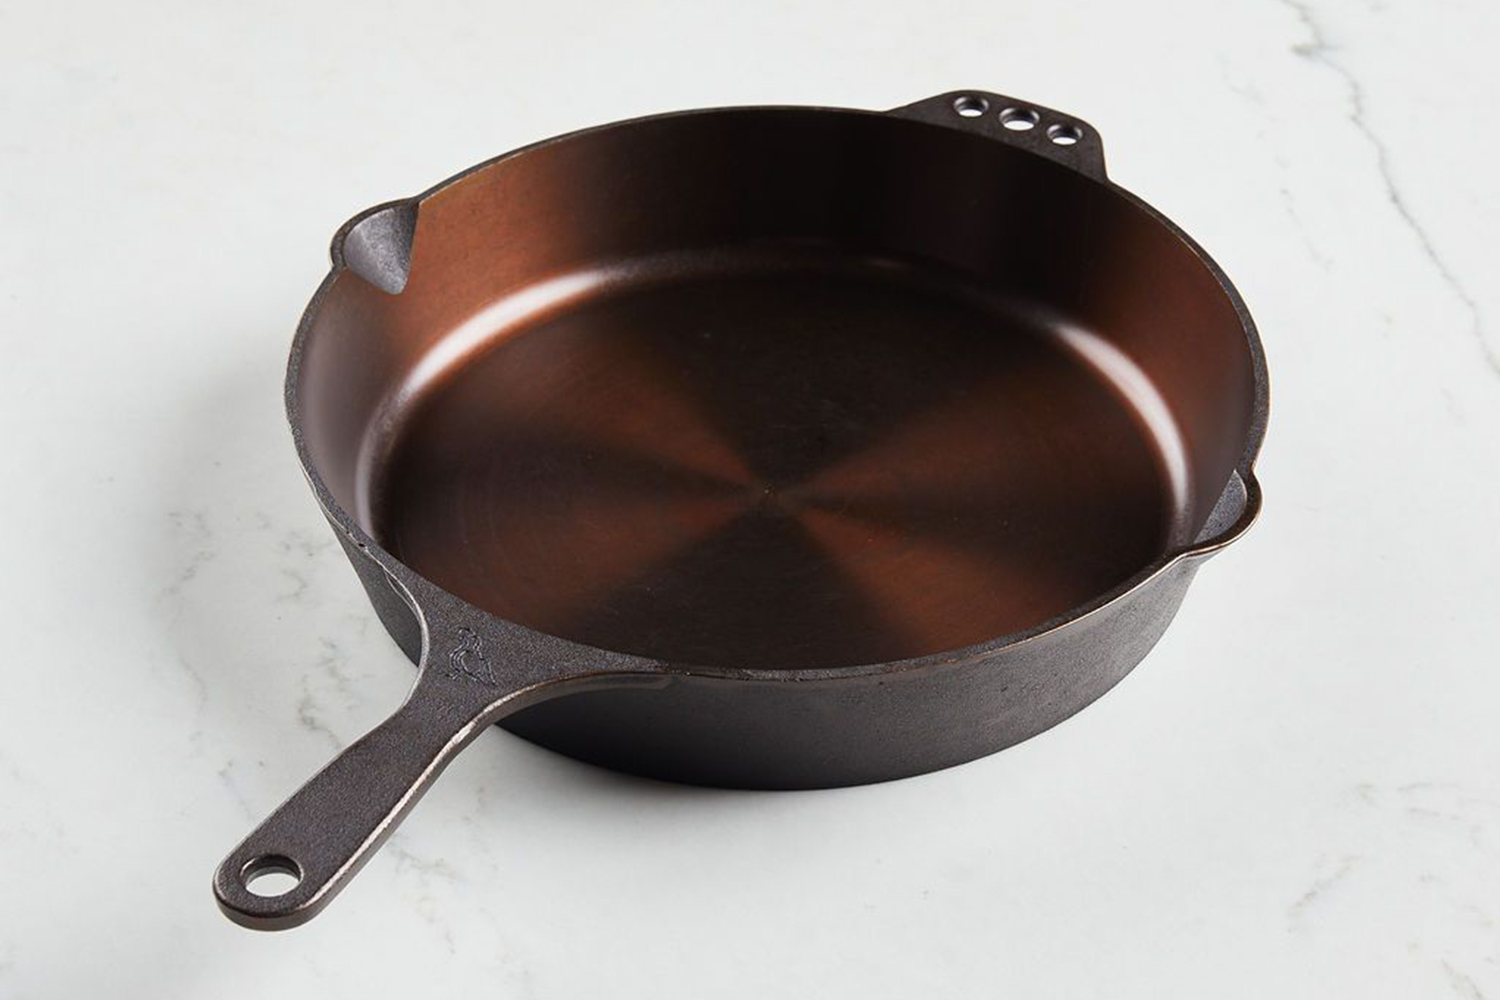 What do we know about Cast Iron made in Colombia? The pour spouts are HUGE  compared to Lodge, which I like. The finish seems smoother, but not like a  vintage pan, and